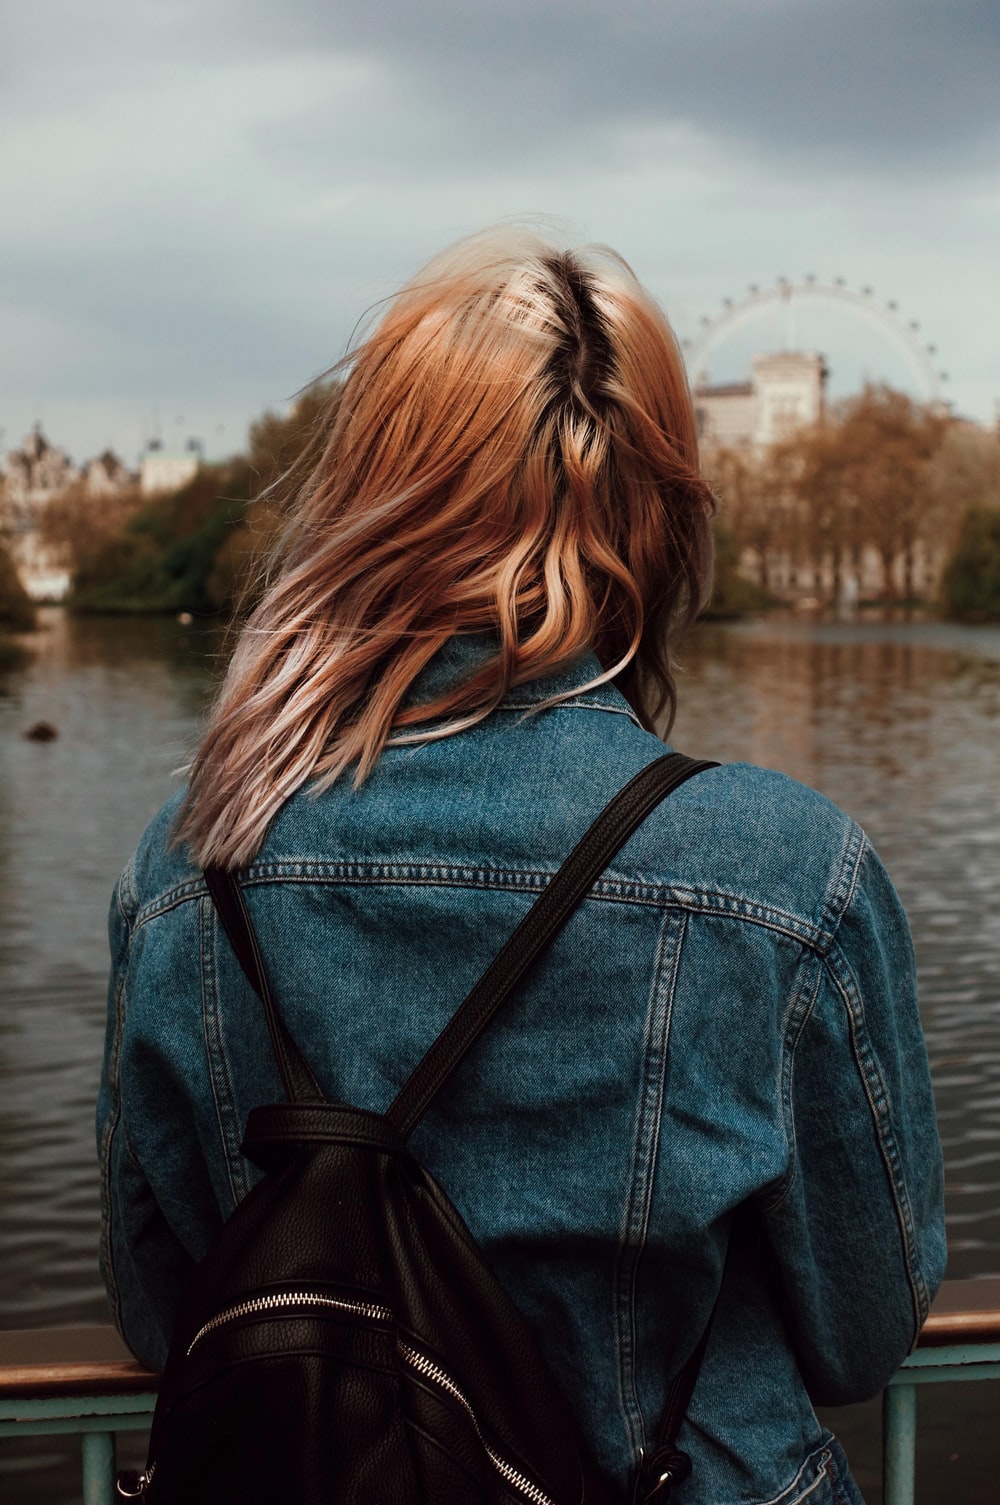 Girl From Behind Picture. Download Free Image